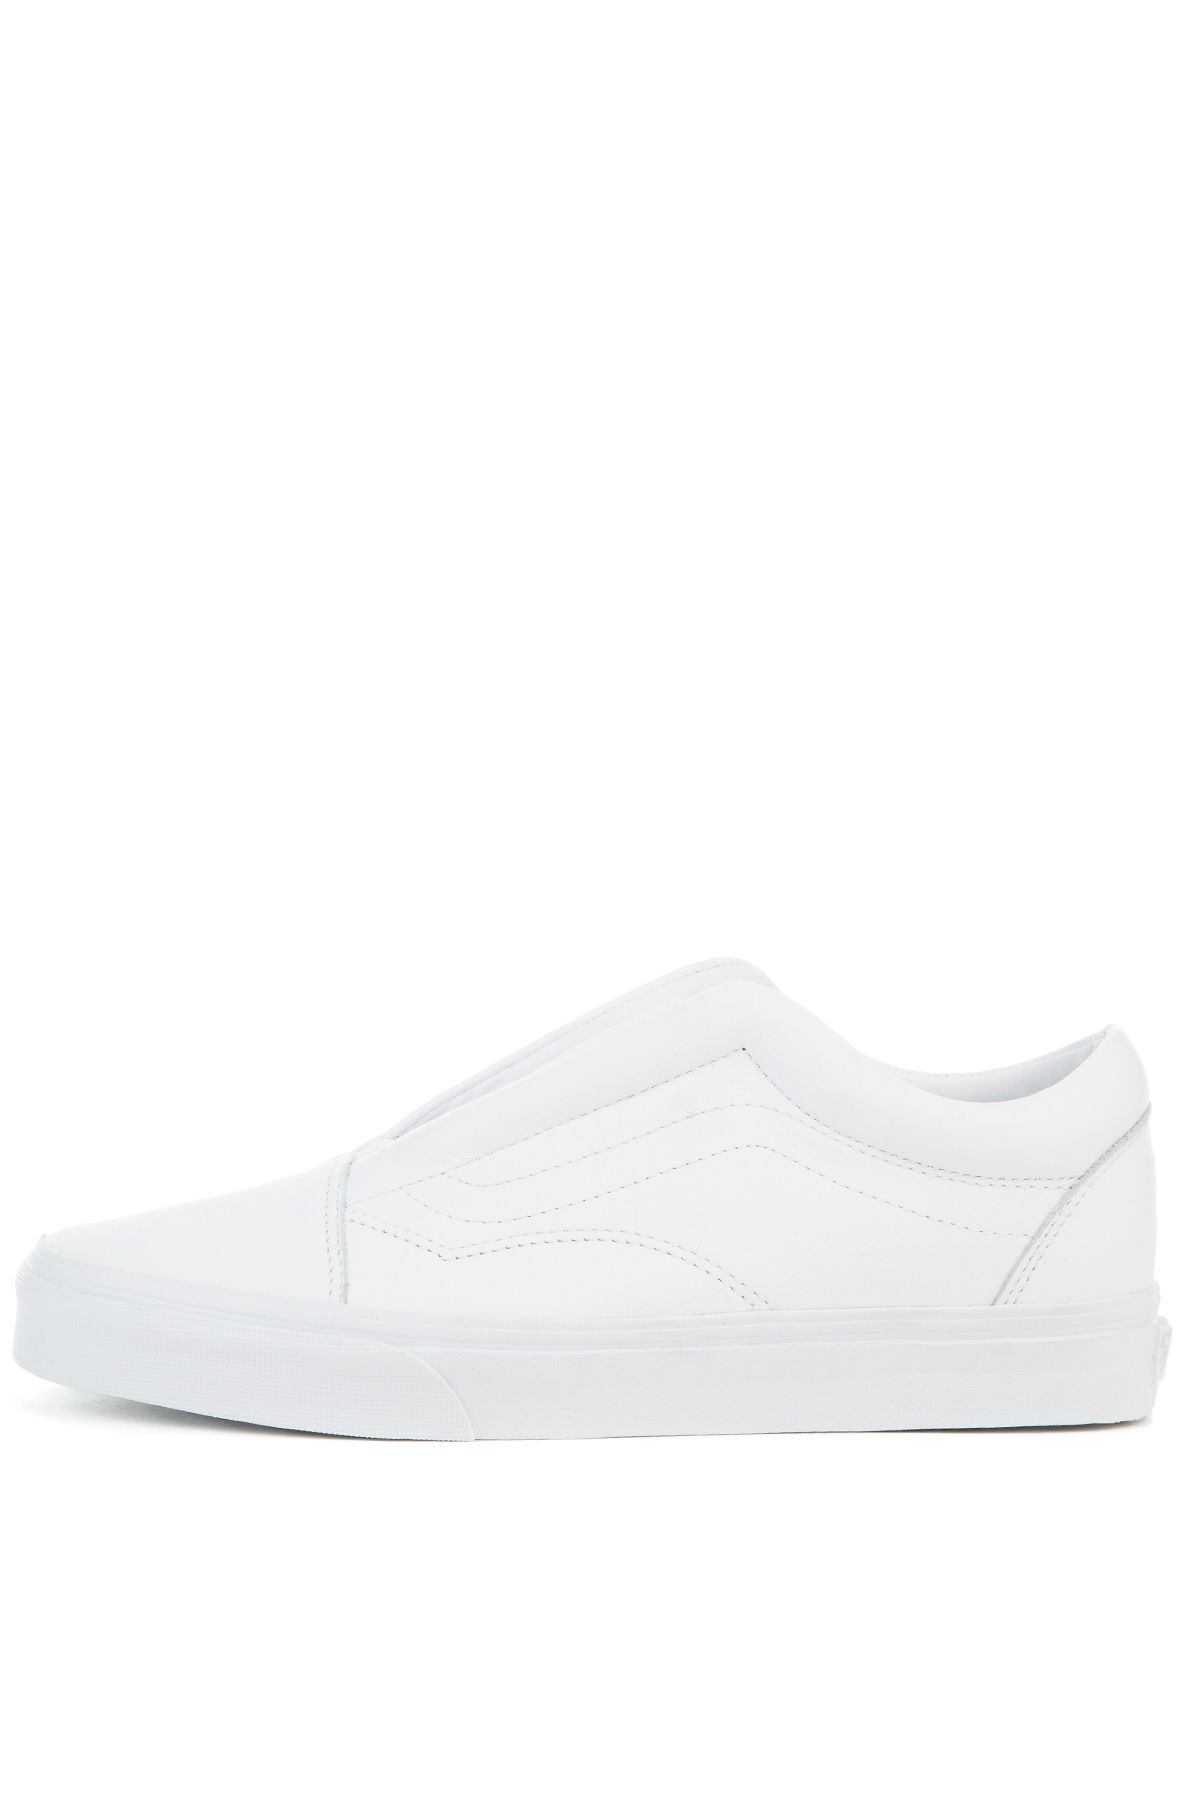 VANS The Old Skool Laceless DX in True White VN0A3DPCL3H-WHT ...